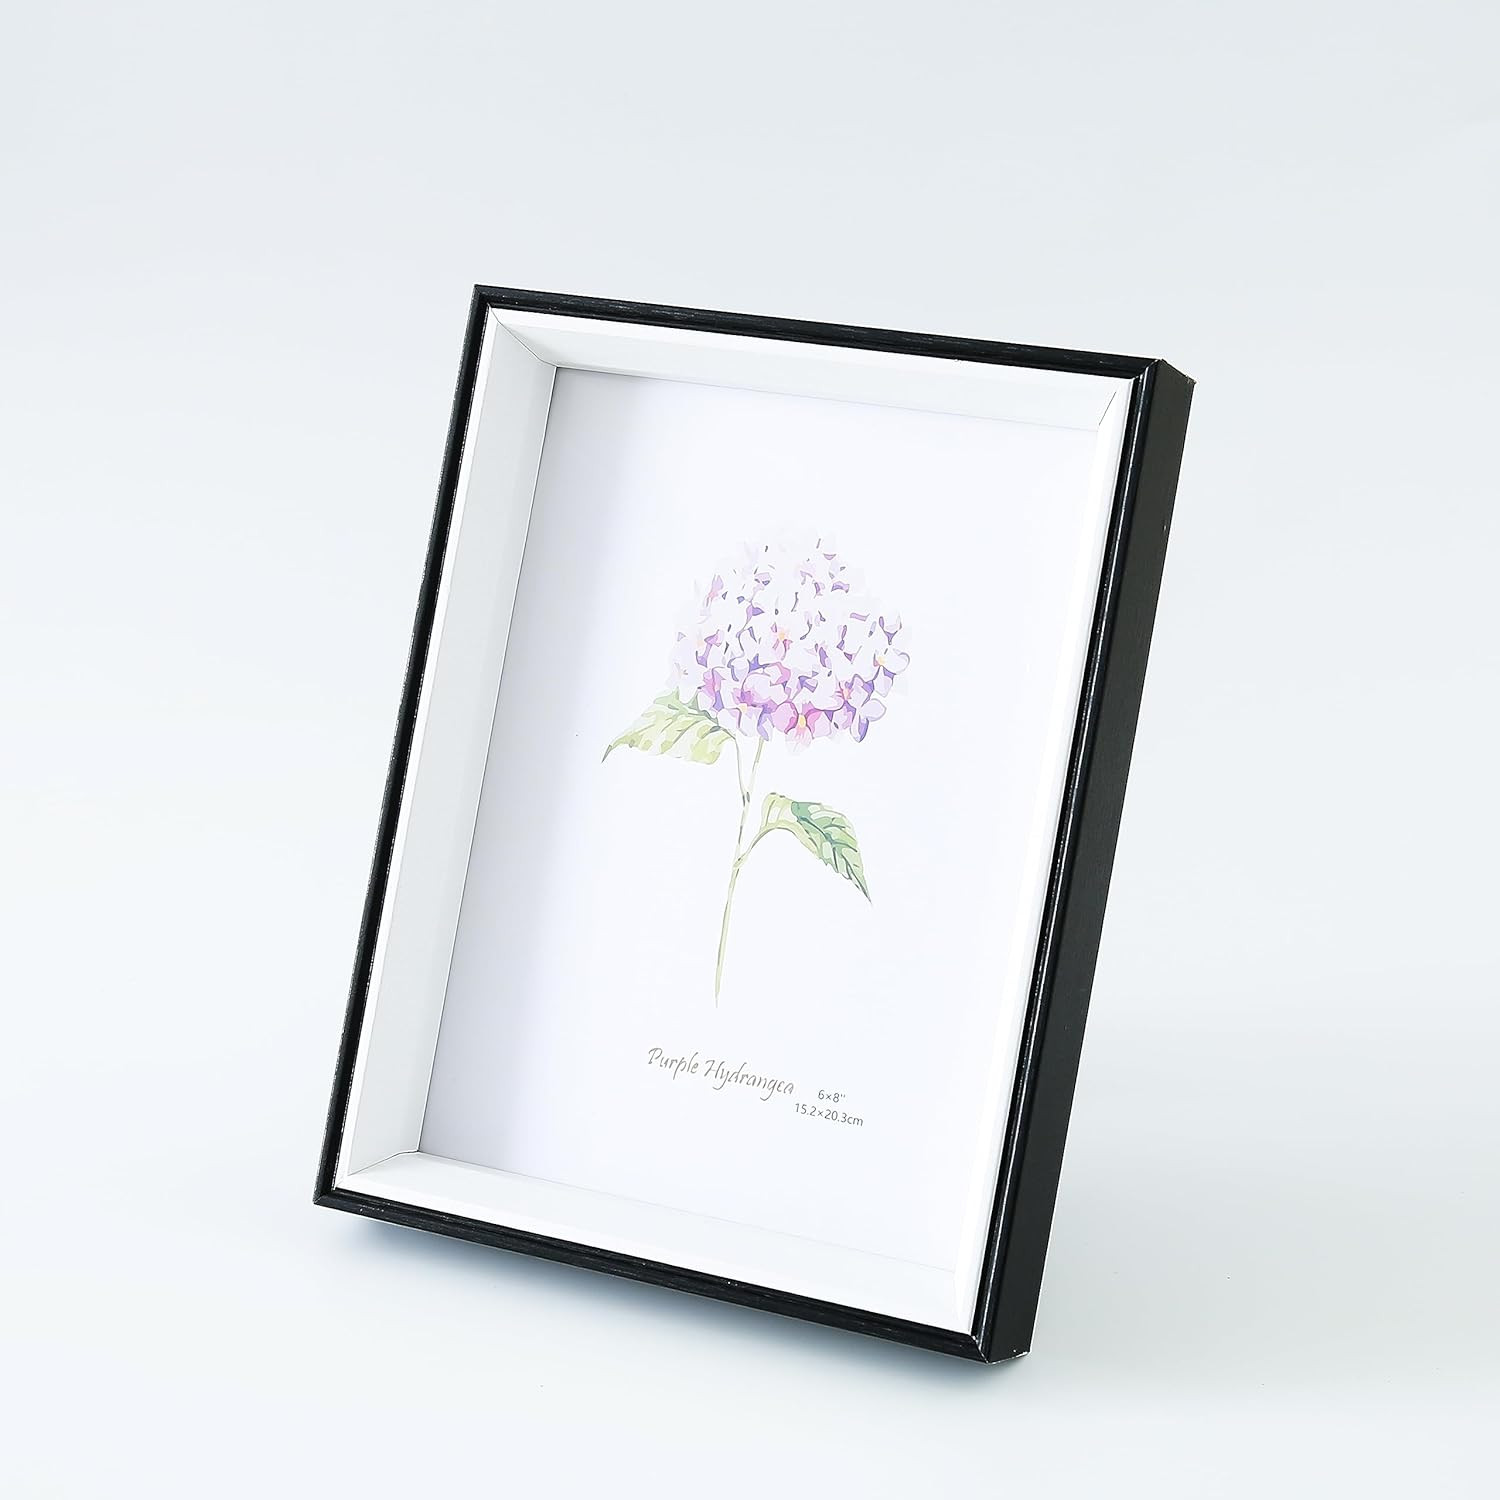 Kuber Industries Photo Frame For Home DÃ©cor|Use Horizontal & Vertical|Crystal Clear Glass|Perfect For Home, Office And Shop 